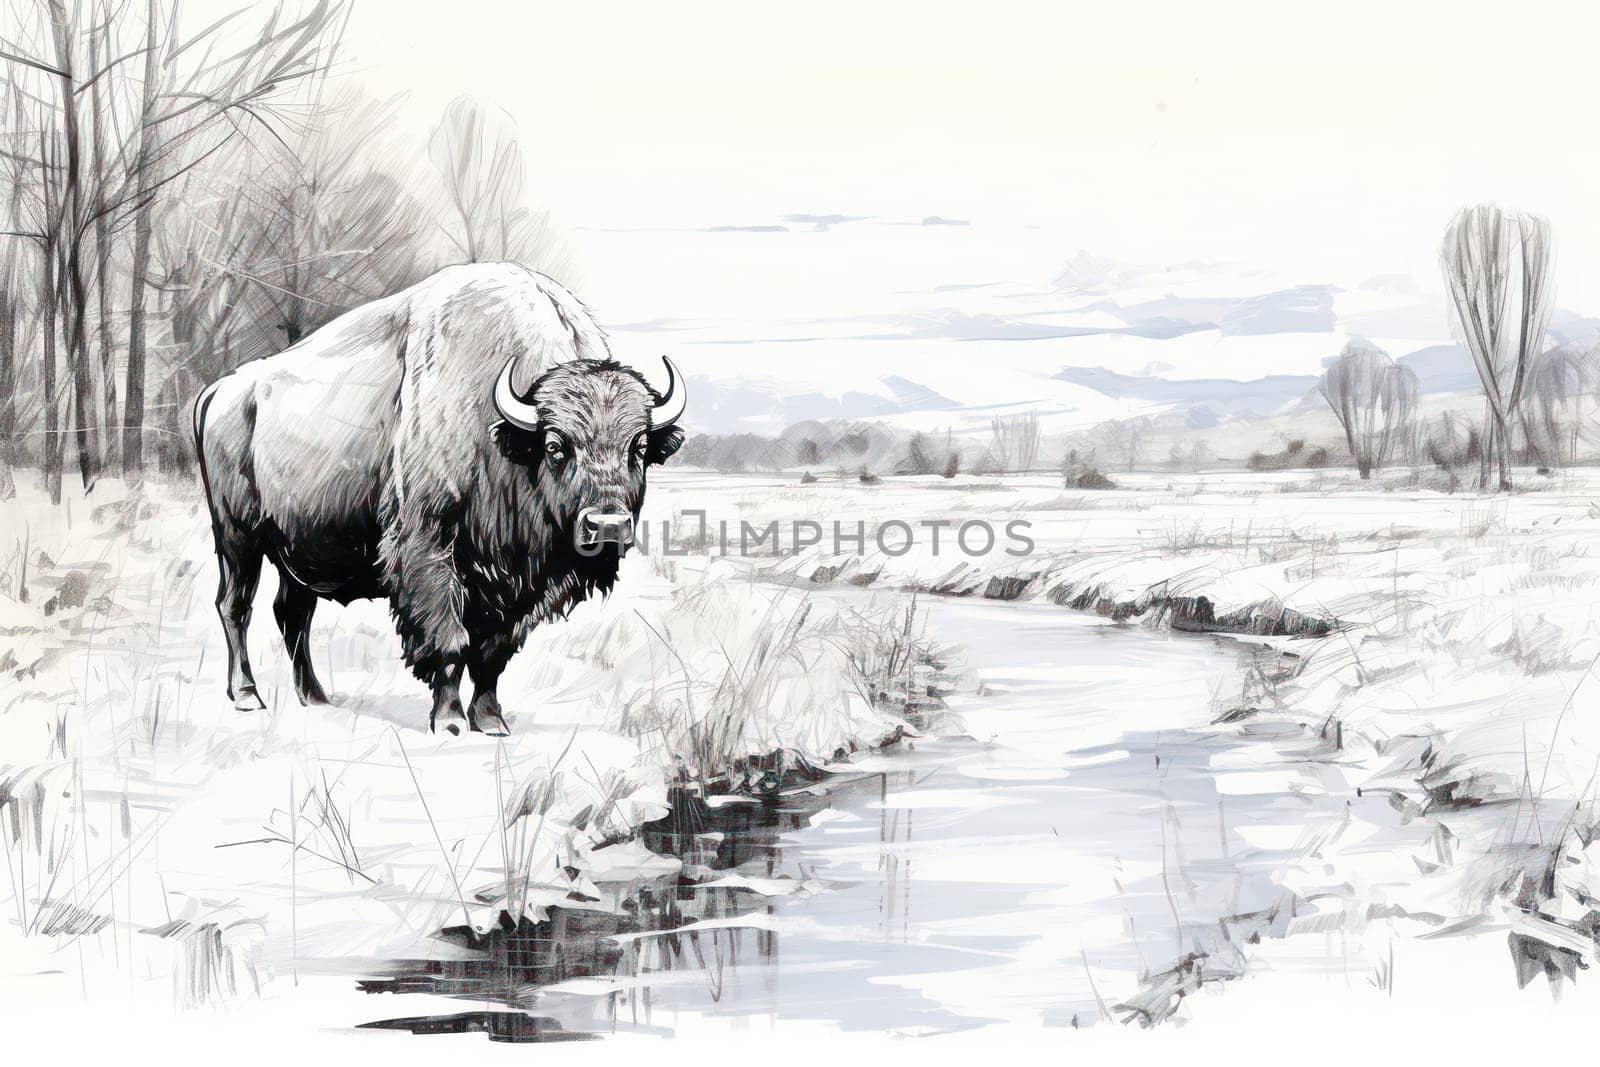 Wild Bison Grazing in the Winter Wonderland: Majestic Mammals Roaming the Snowy Plains of Yellowstone National Park, USA